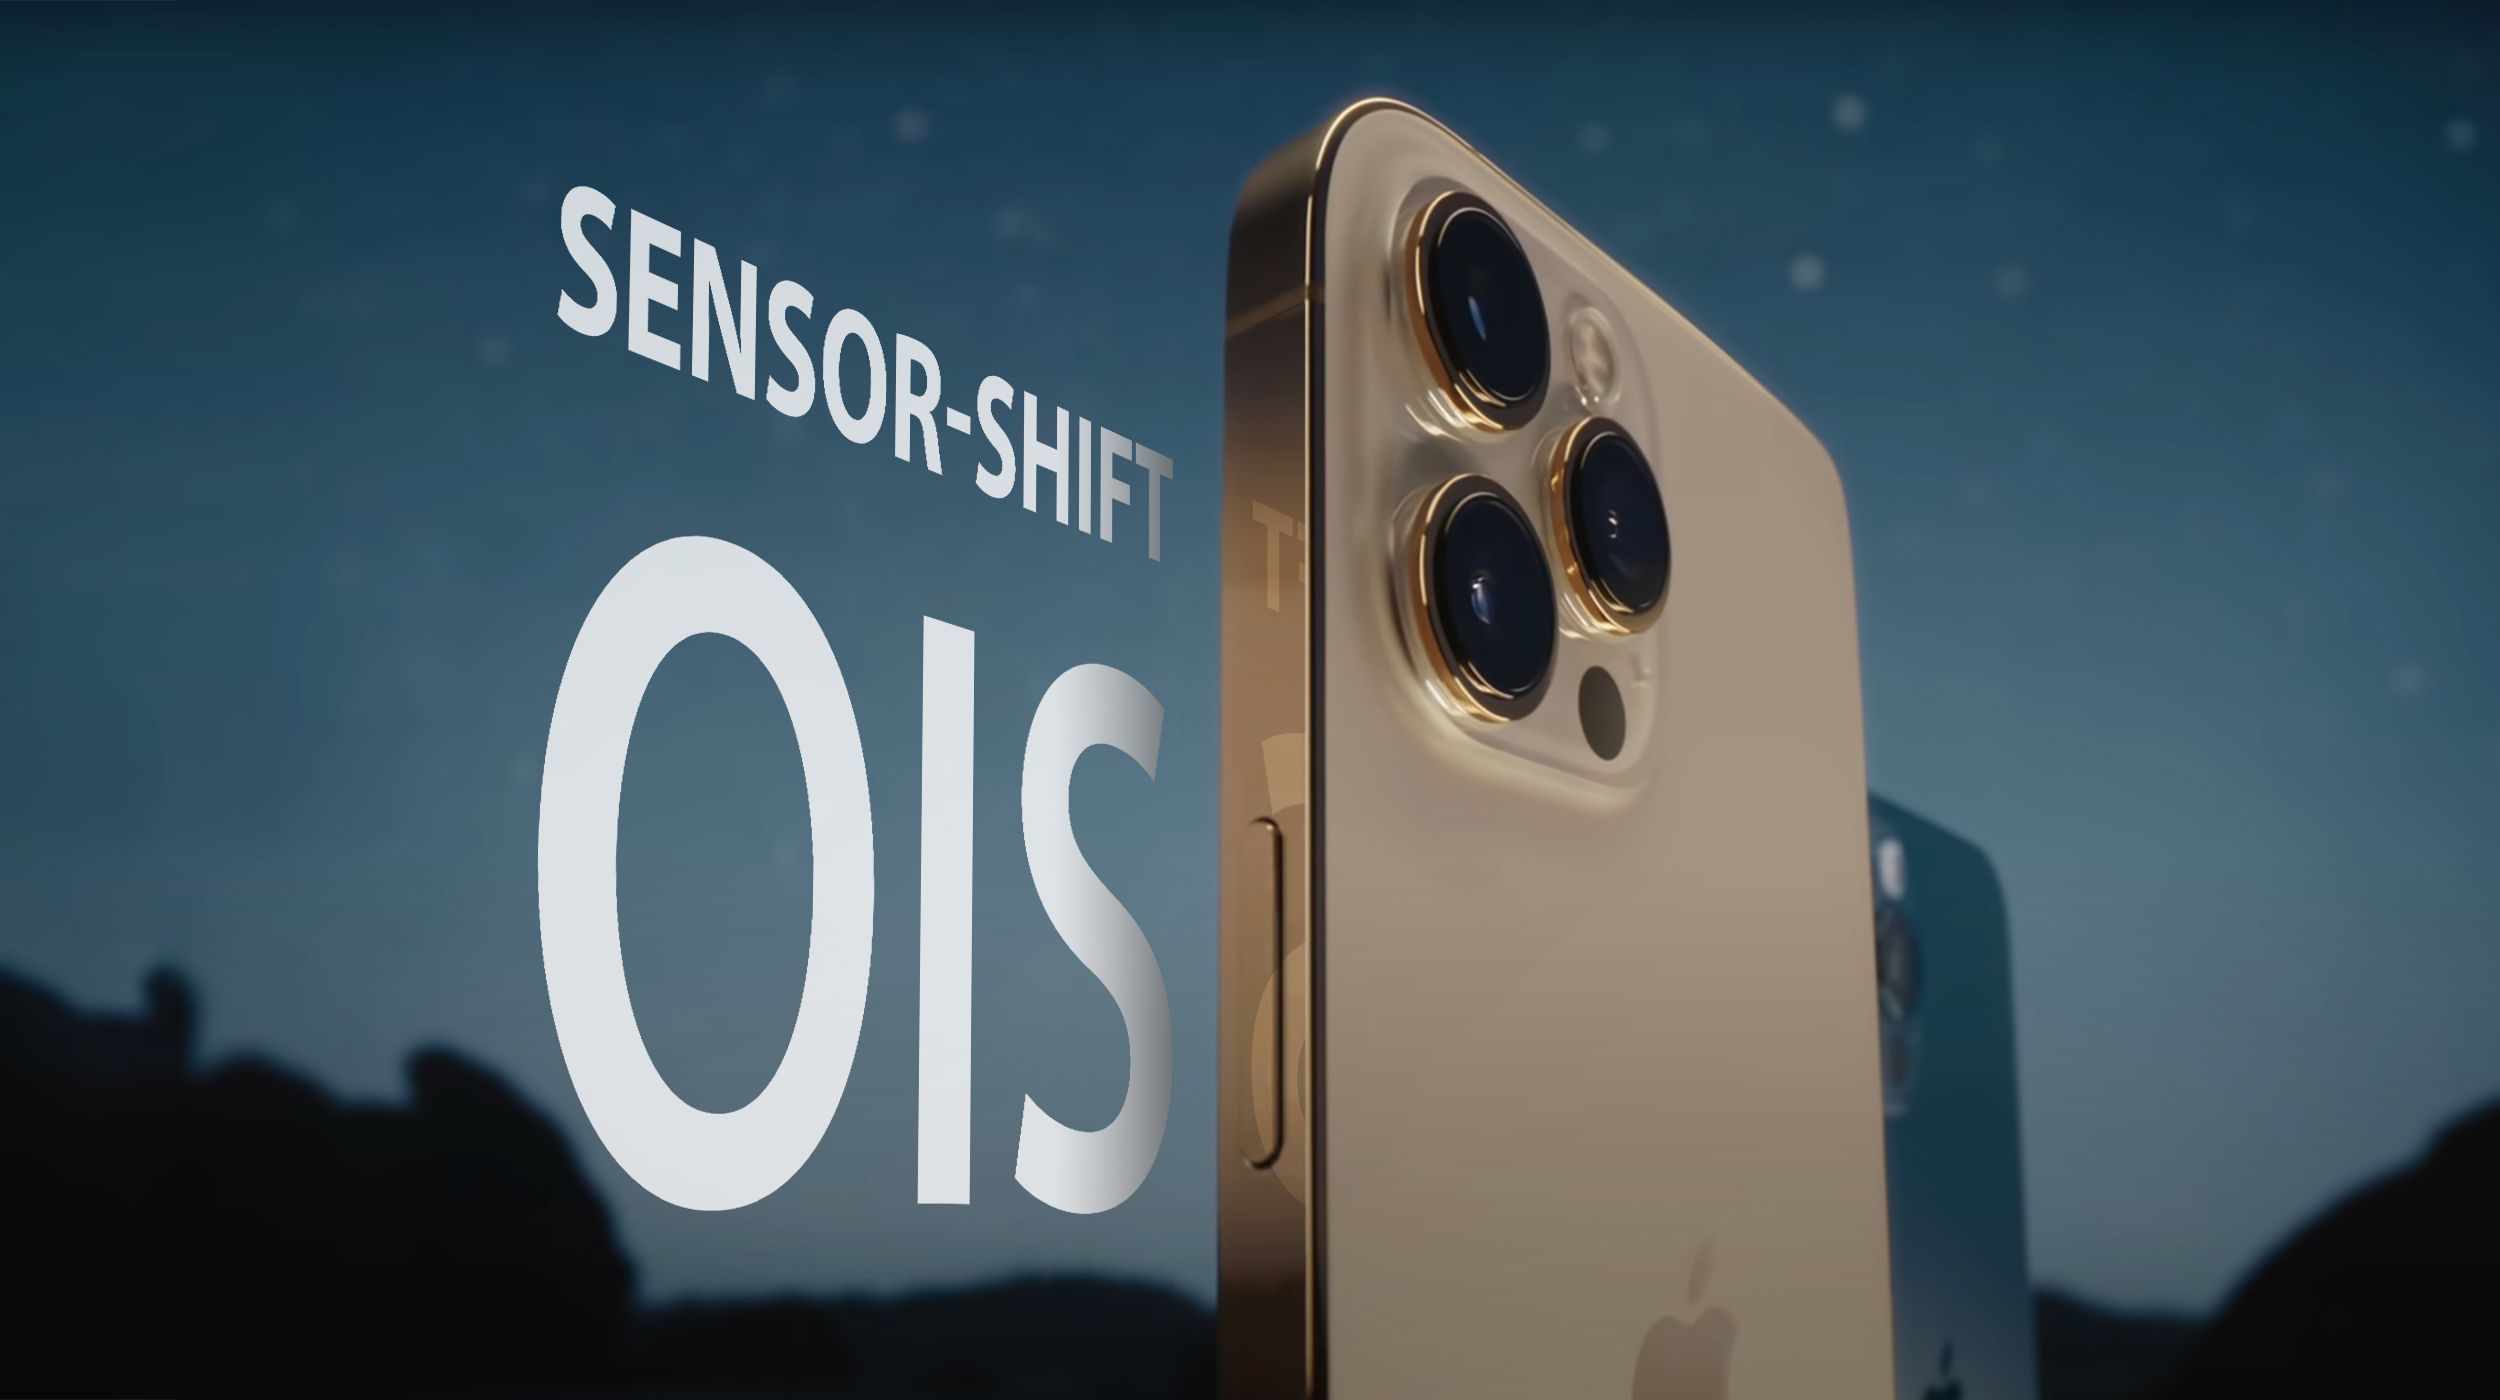 IPhone 13 Pro models are expected to feature enhanced ultra-wide lens with sensor shift image stabilization and auto focus